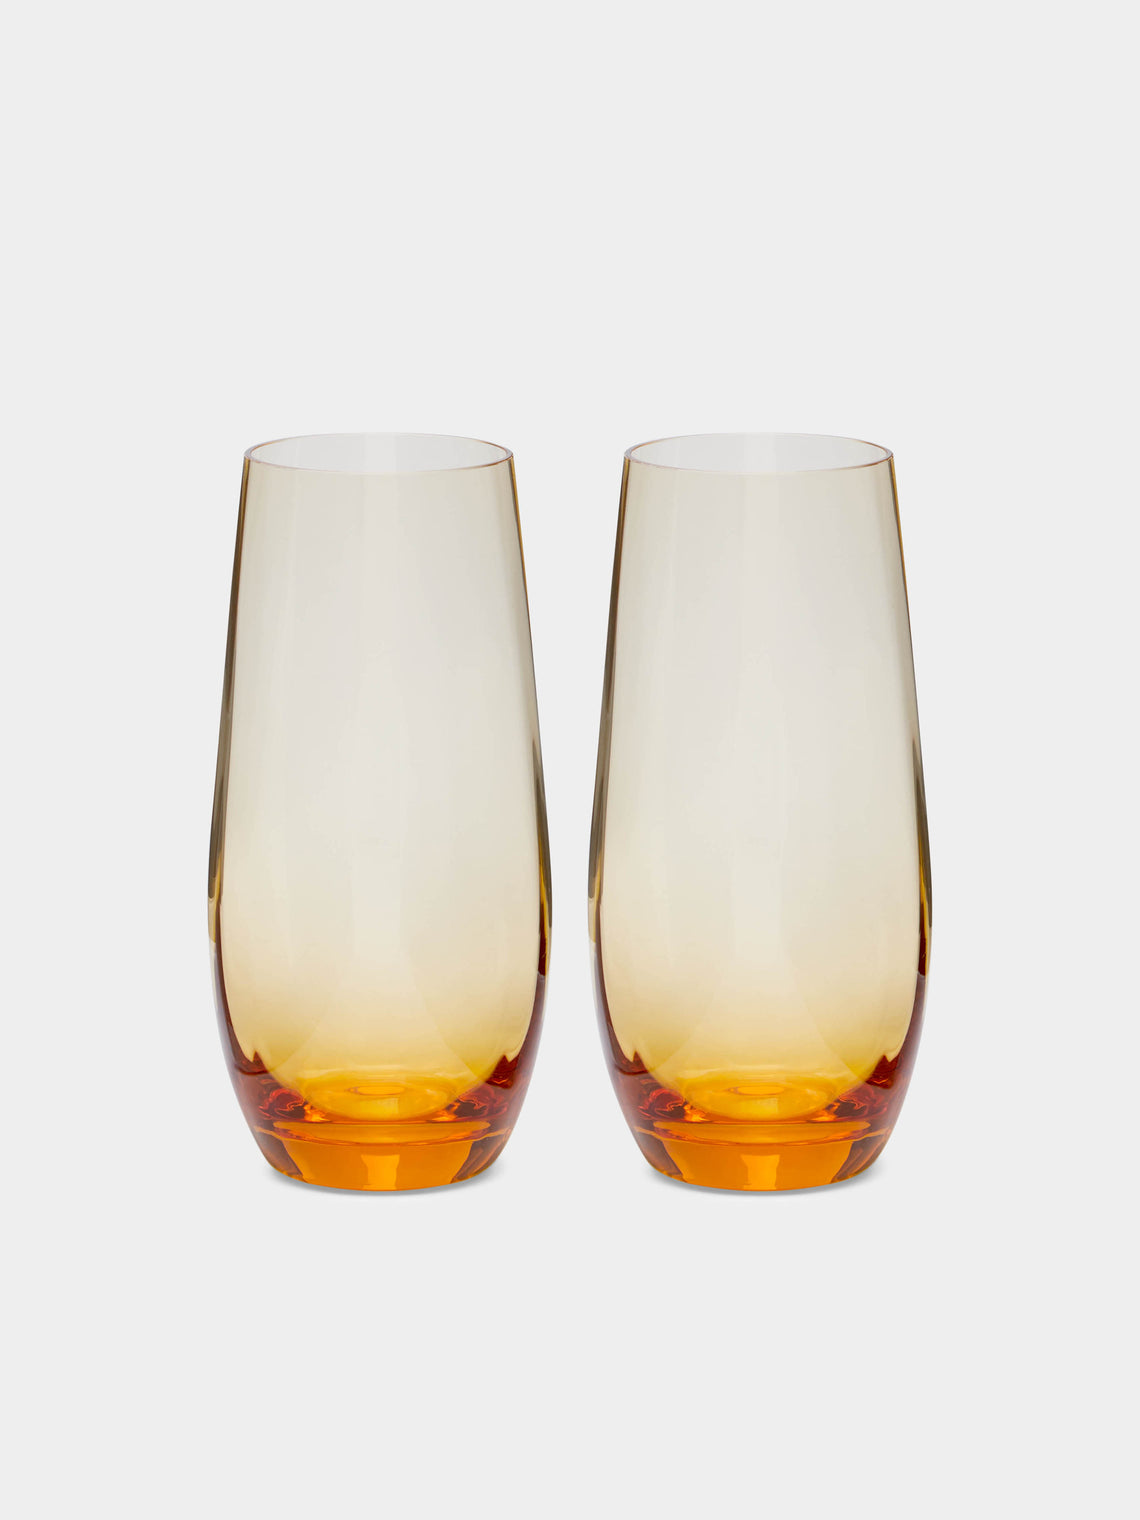 Moser - Optic Hand-Blown Crystal Water Glasses (Set of 2) -  - ABASK